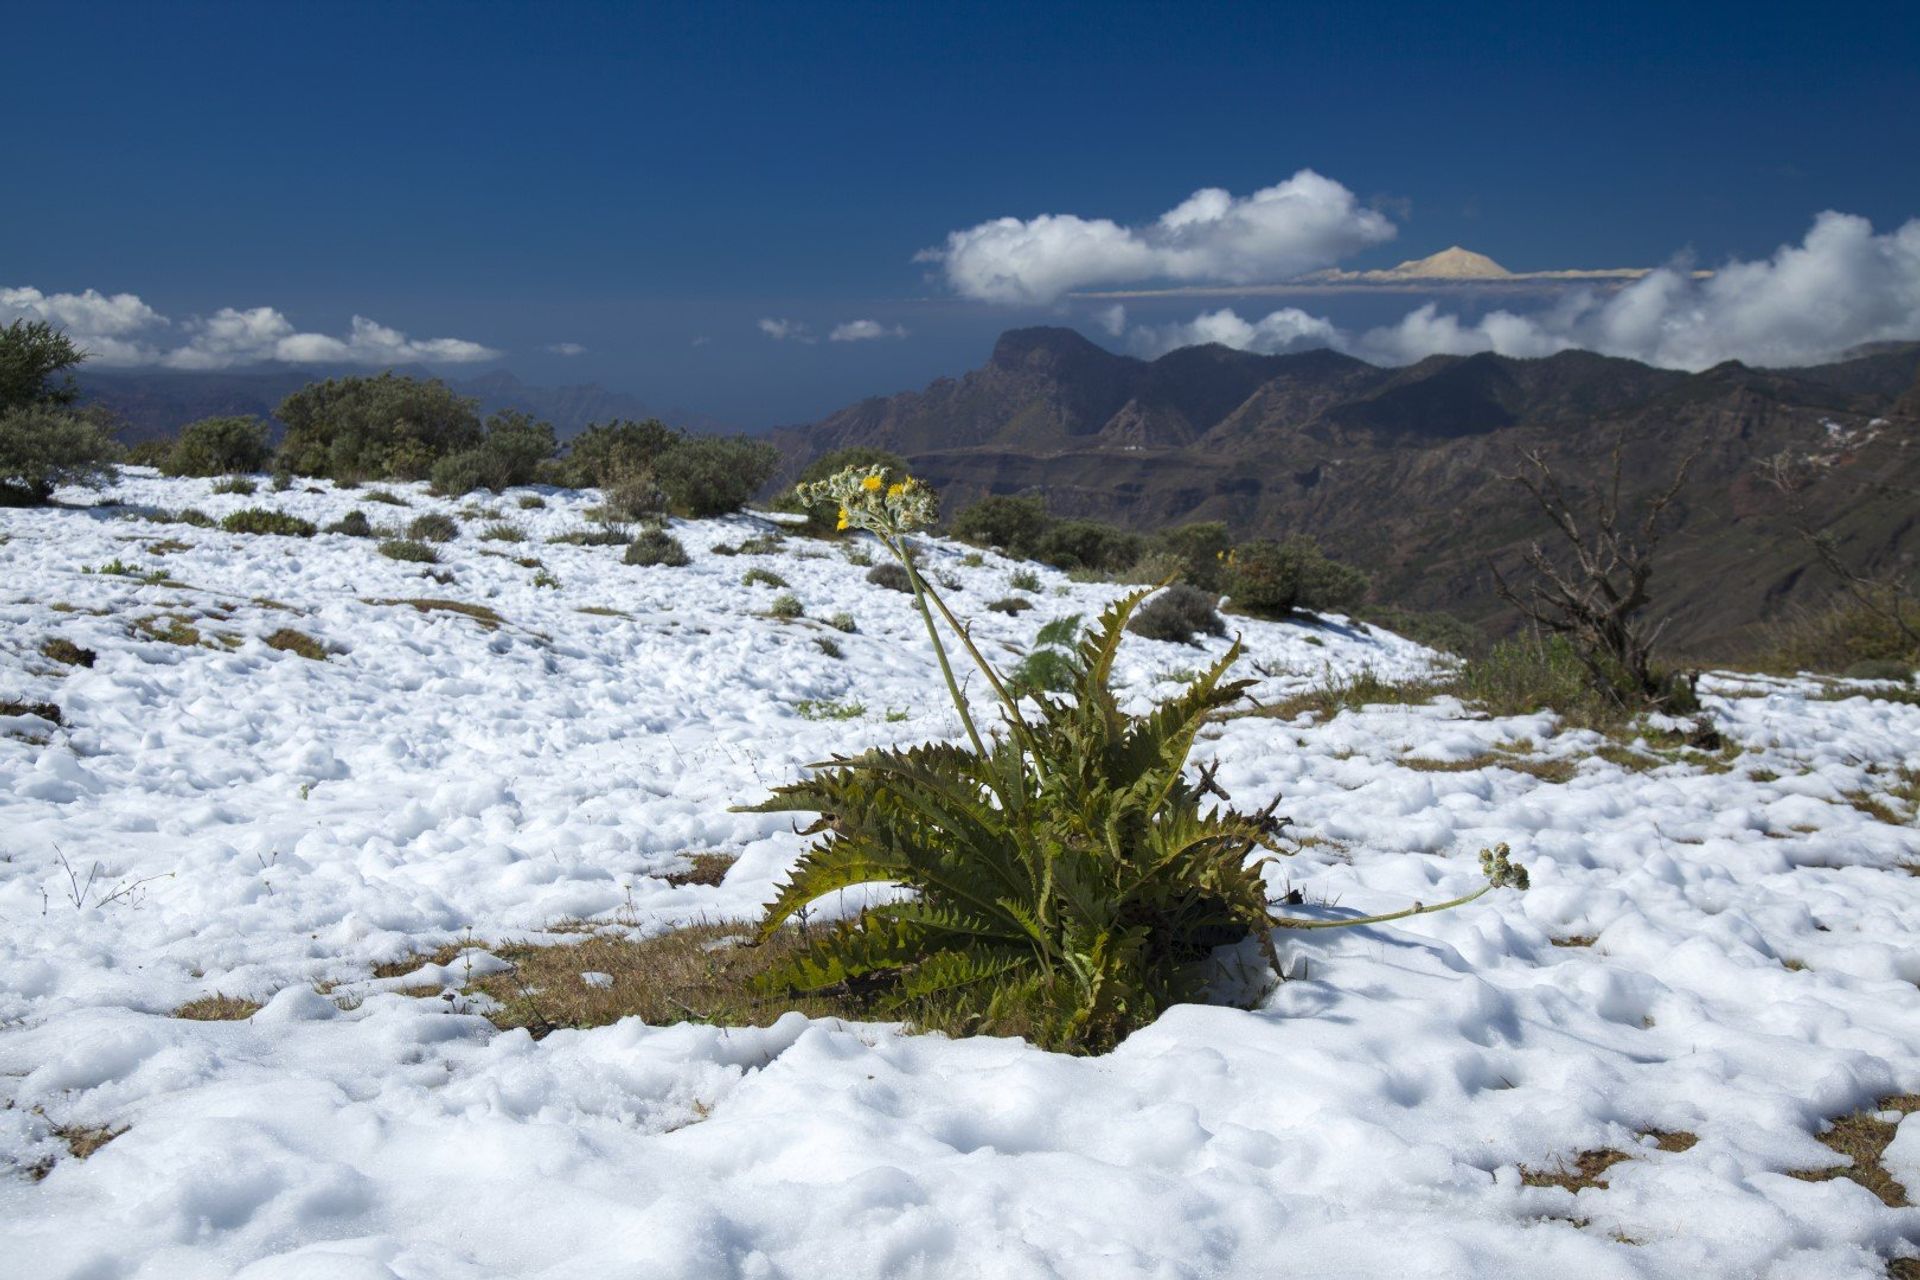 Snow in the highlands of Tejeda village in central Gran Canaria. The mountain behind the clouds is Tenerife!